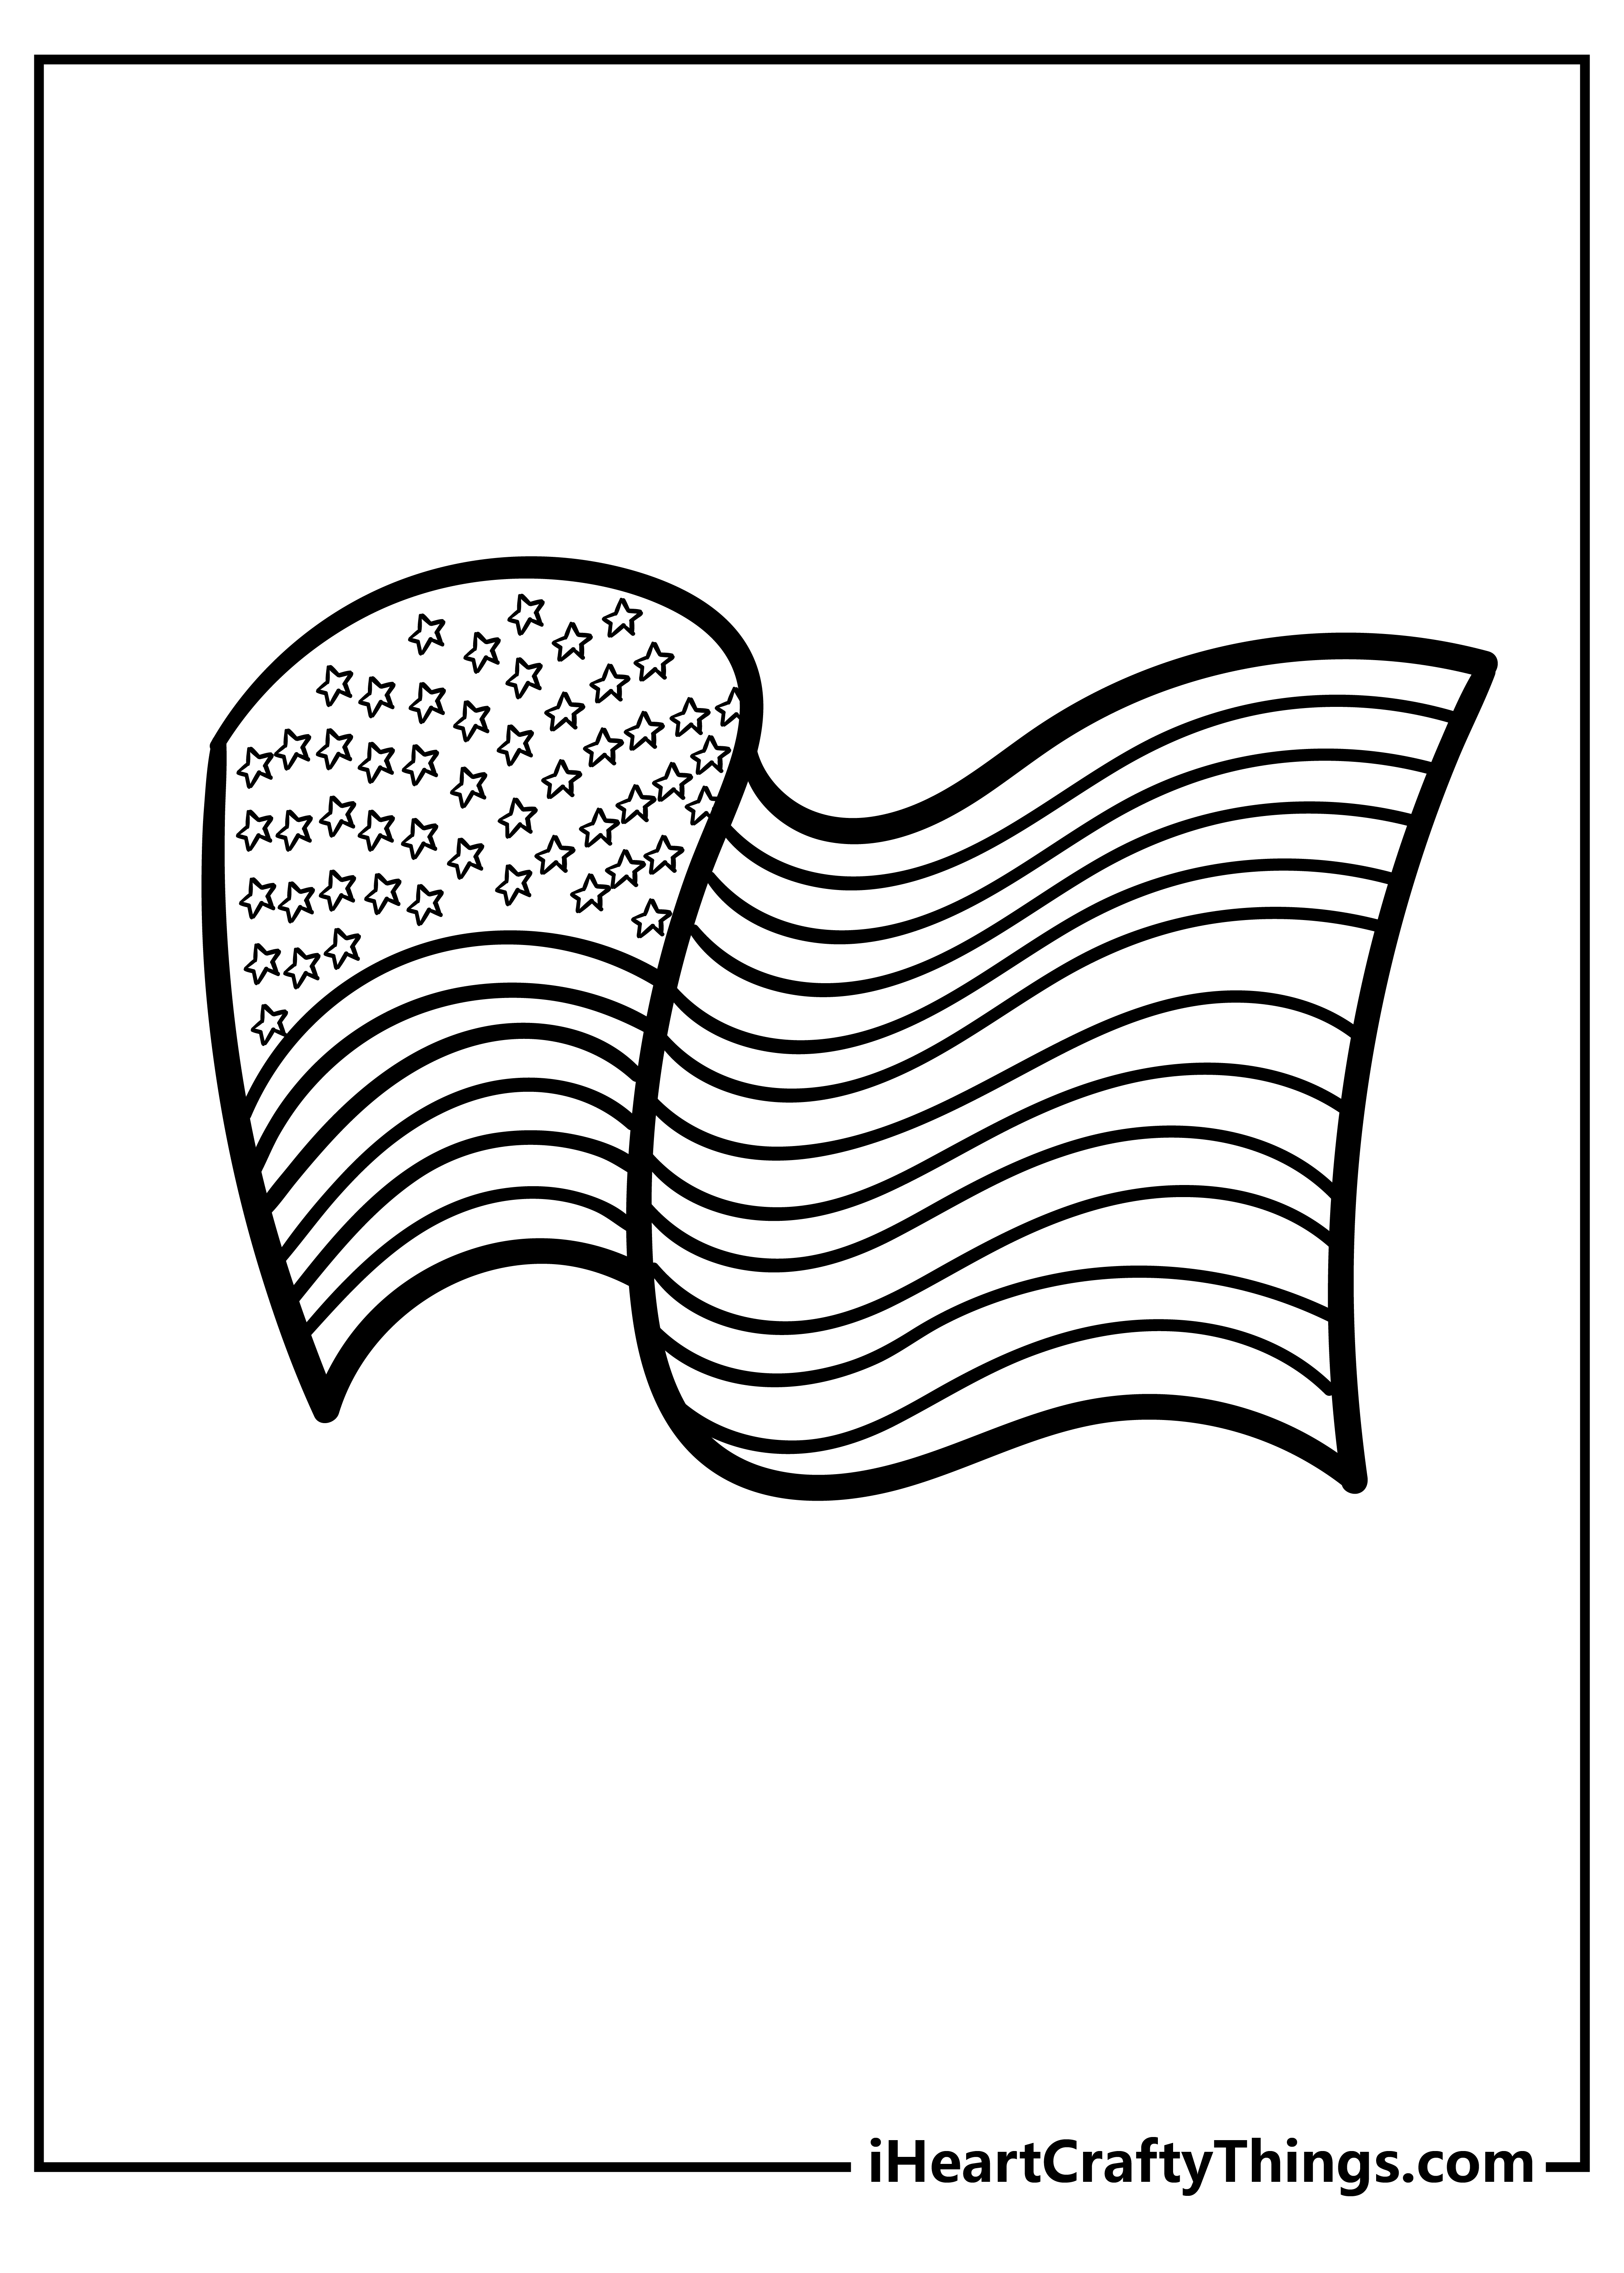 Printable American Flag Coloring Pages Updated 20